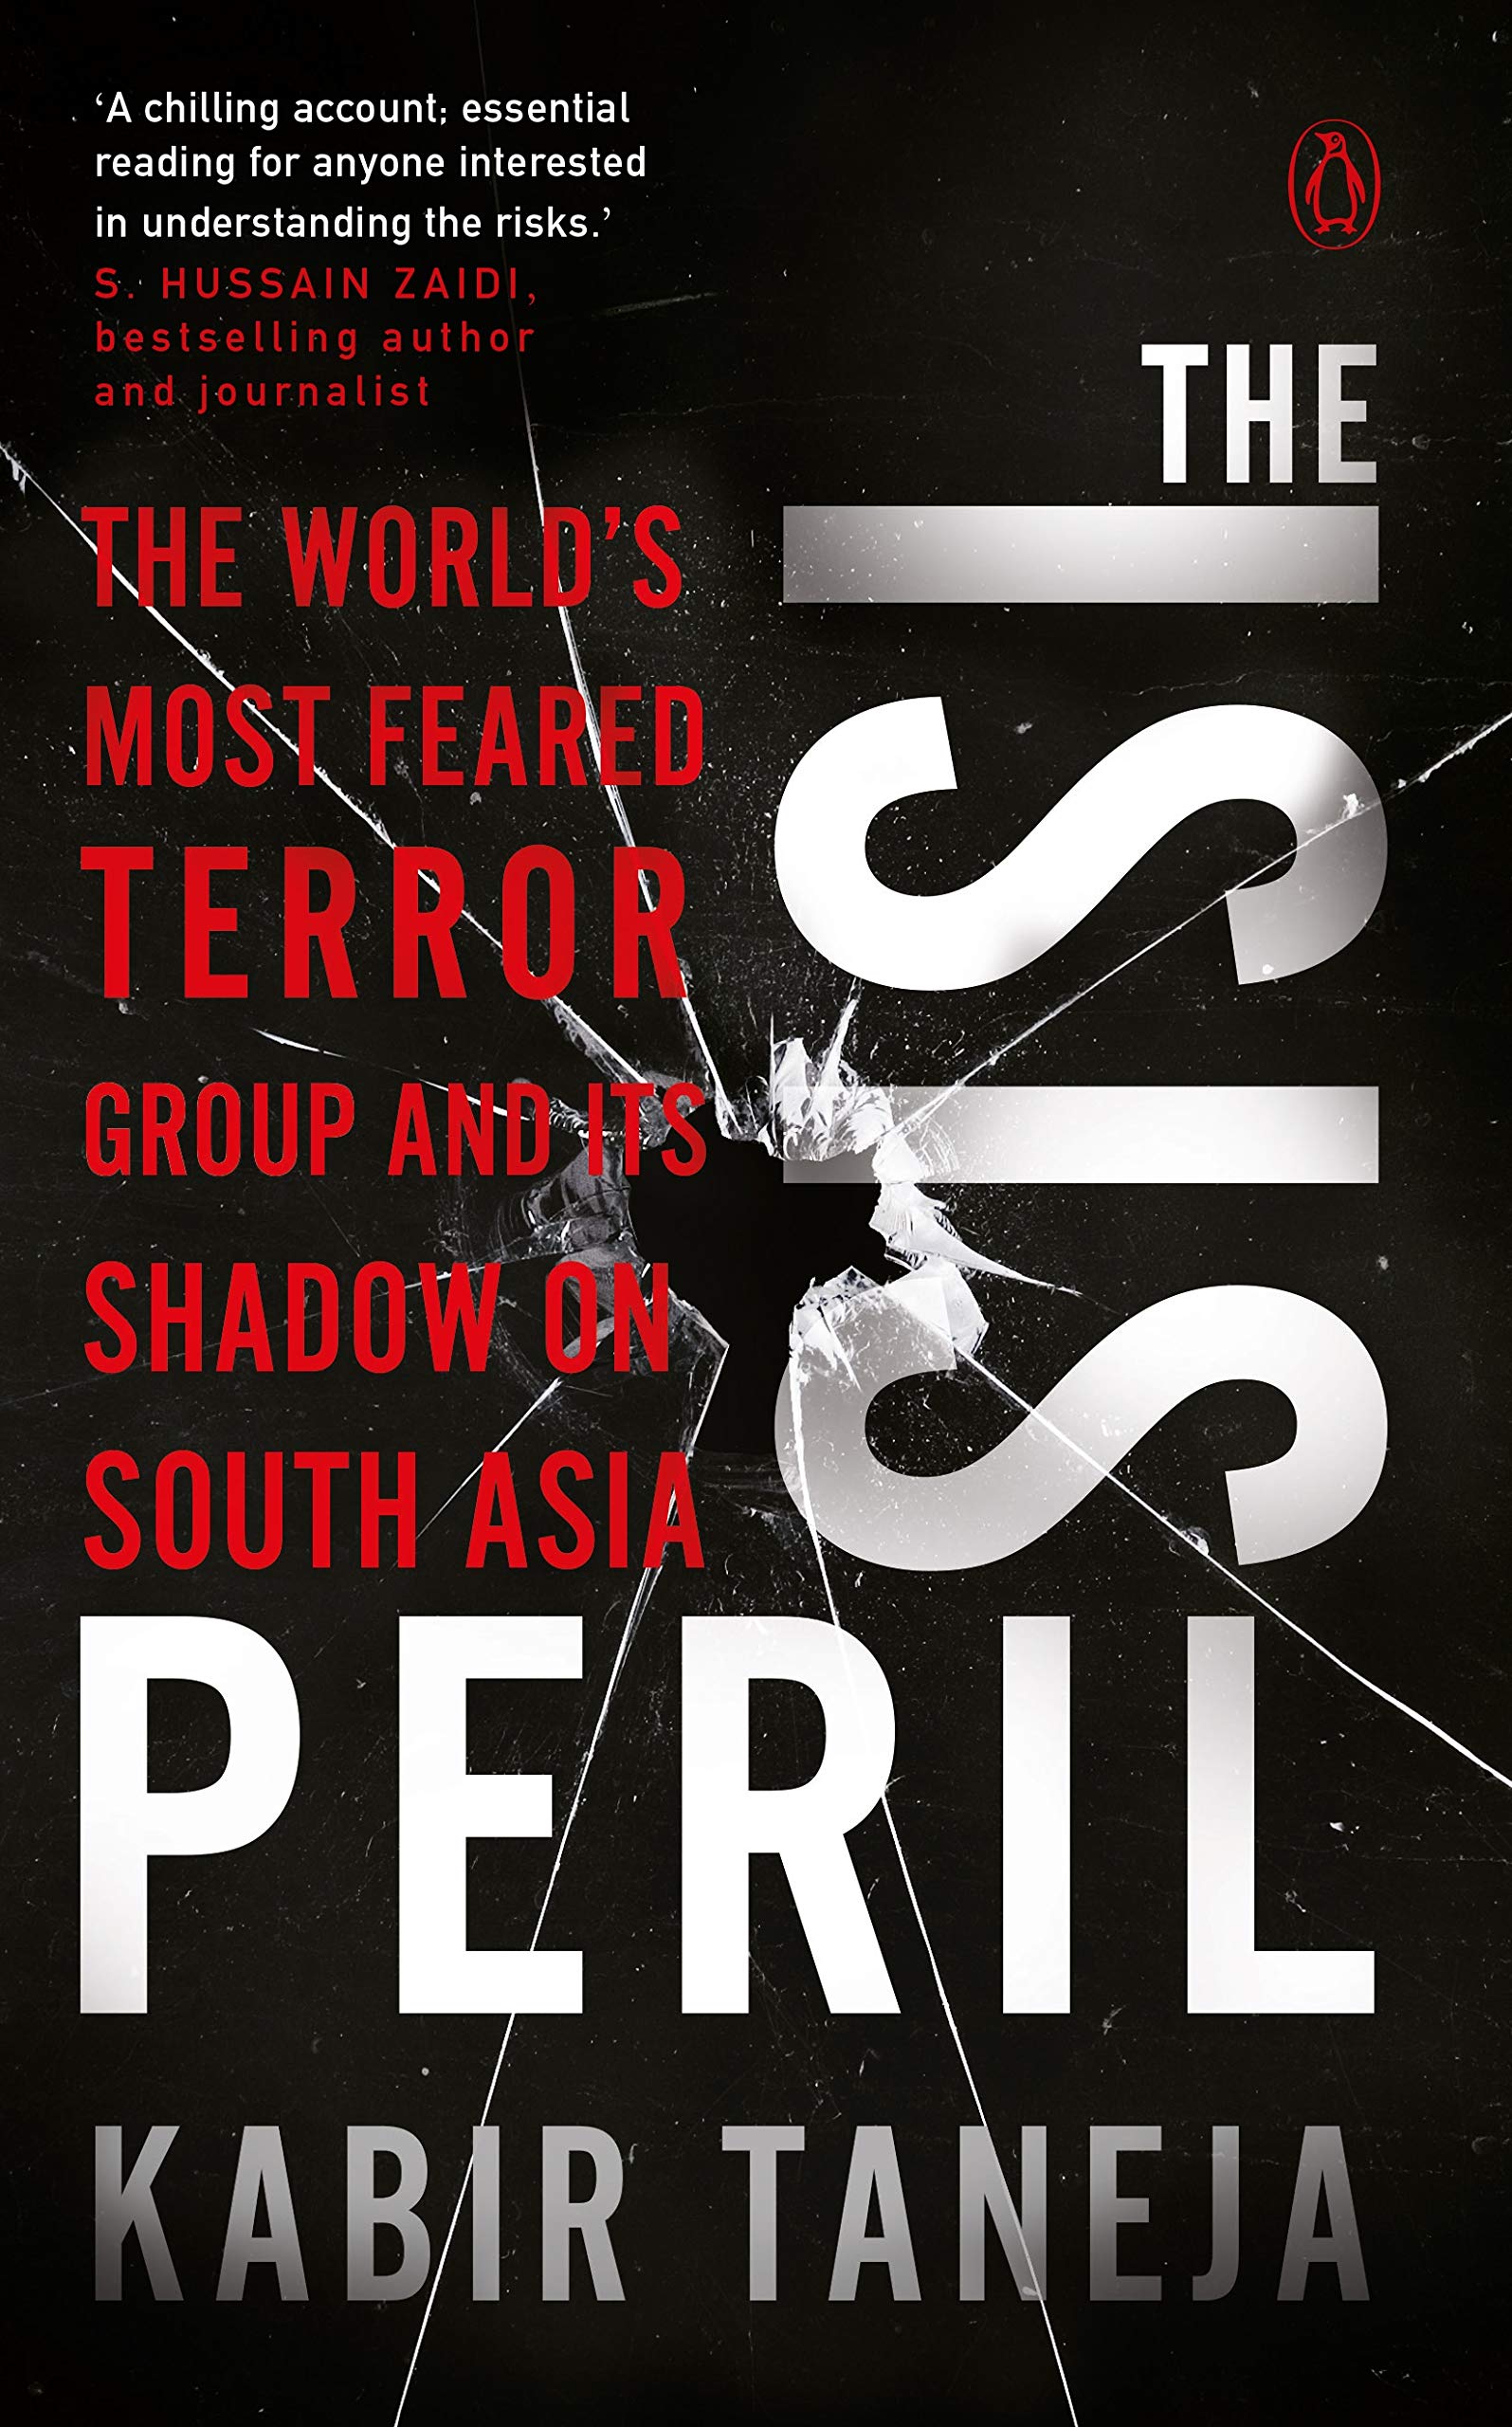 Kabir Taneja on "The ISIS Peril": 'To tackle ISIS and other common terror threats, more institutional cooperation between South Asian countries is needed'